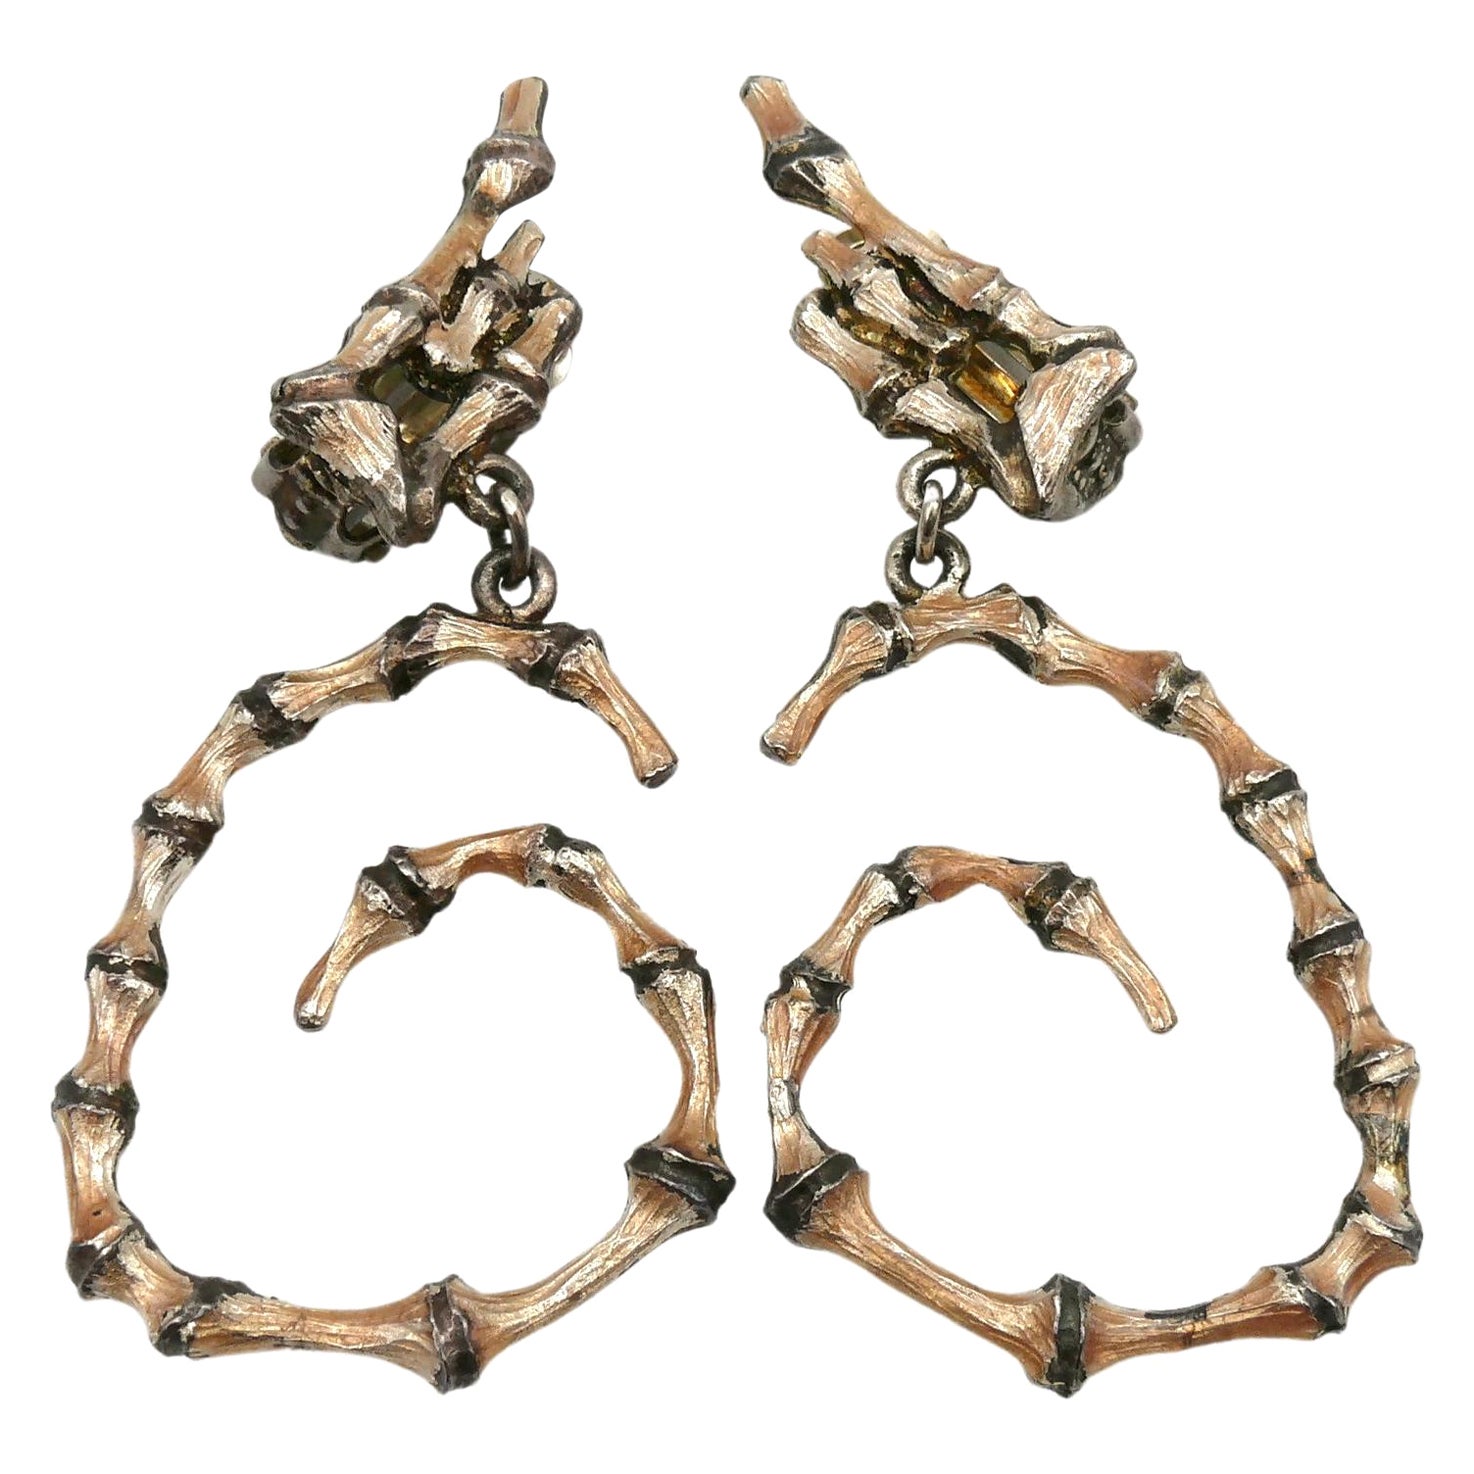 CHRISTIAN LACROIX Vintage Distressed Patina Bamboo Design Hoop Earrings